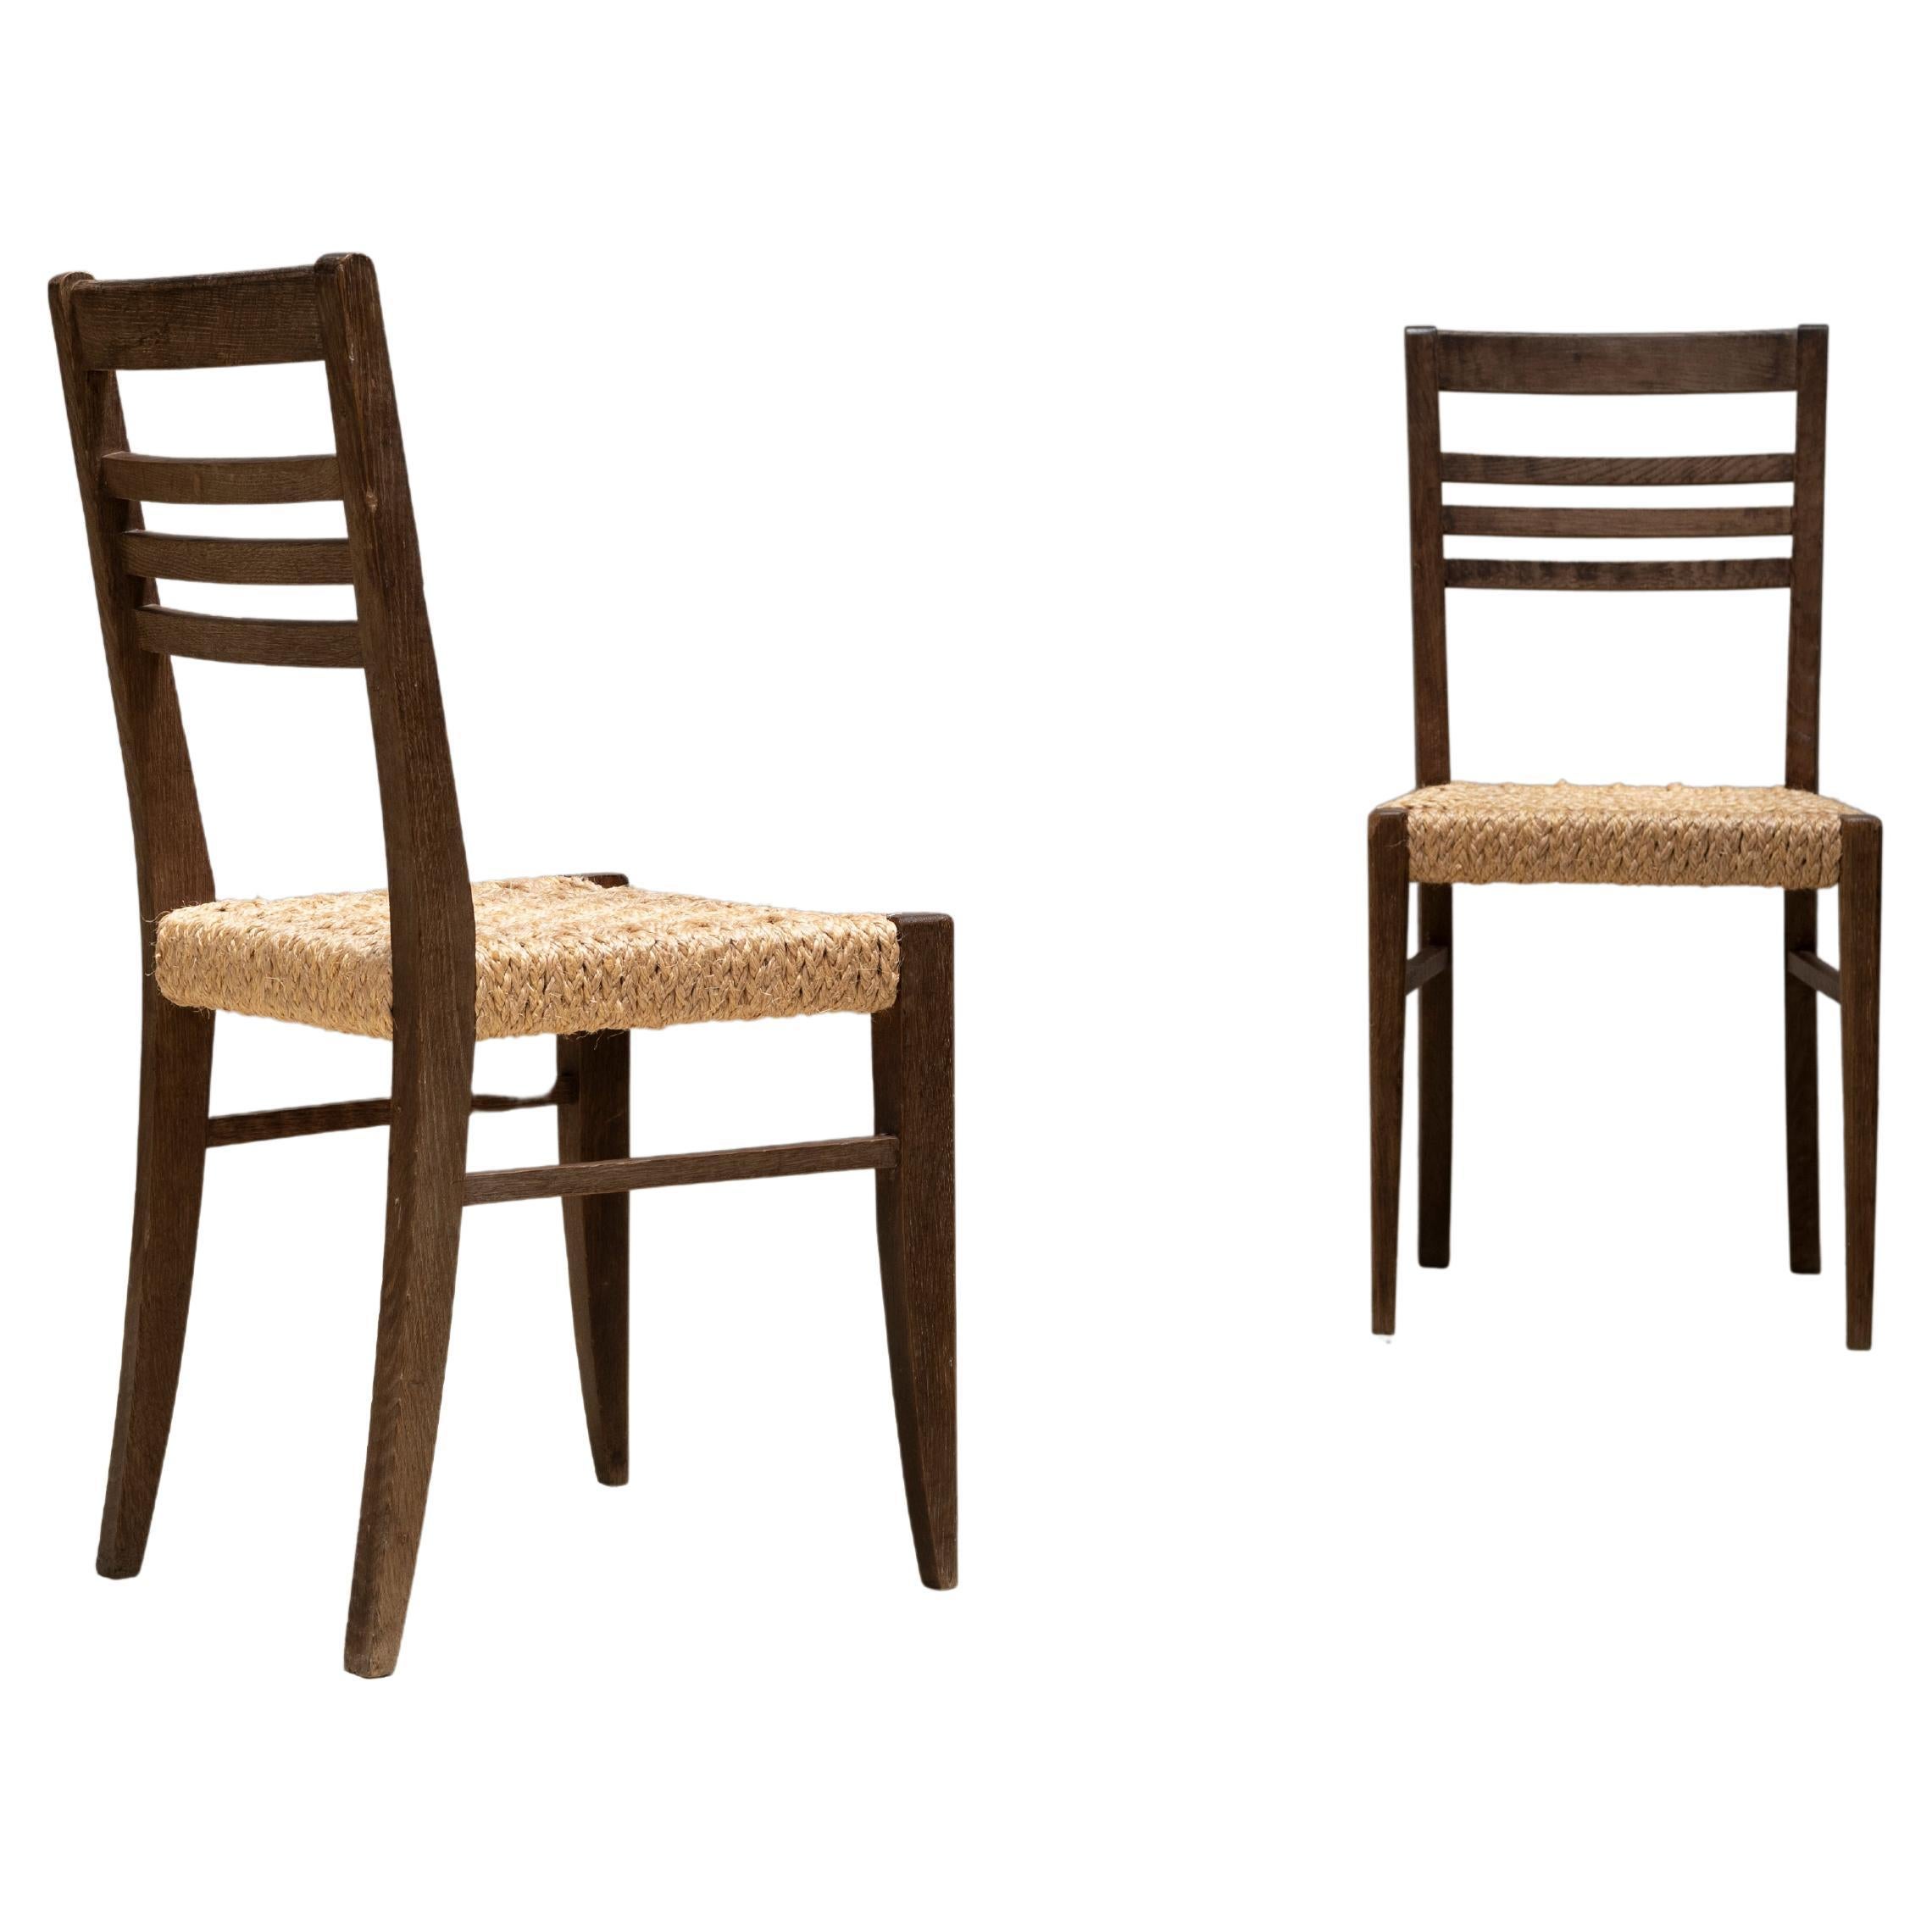 Pair of Oak & Rope Dining Chairs, Audoux & Minet, 1950s